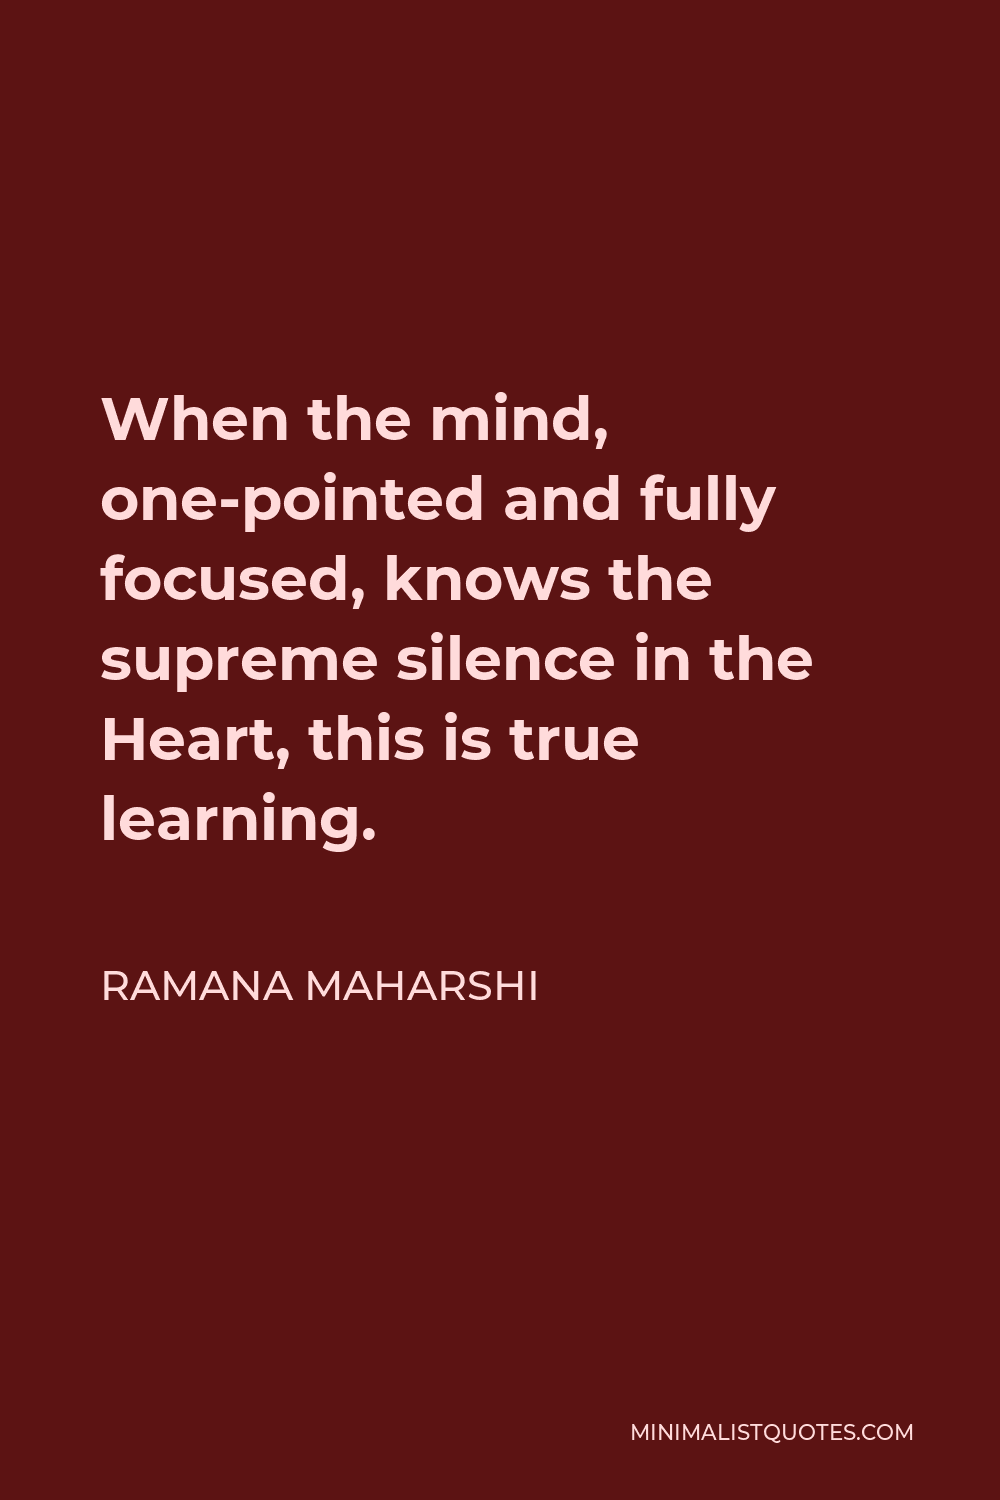 Ramana Maharshi Quote - When the mind, one-pointed and fully focused, knows the supreme silence in the Heart, this is true learning.